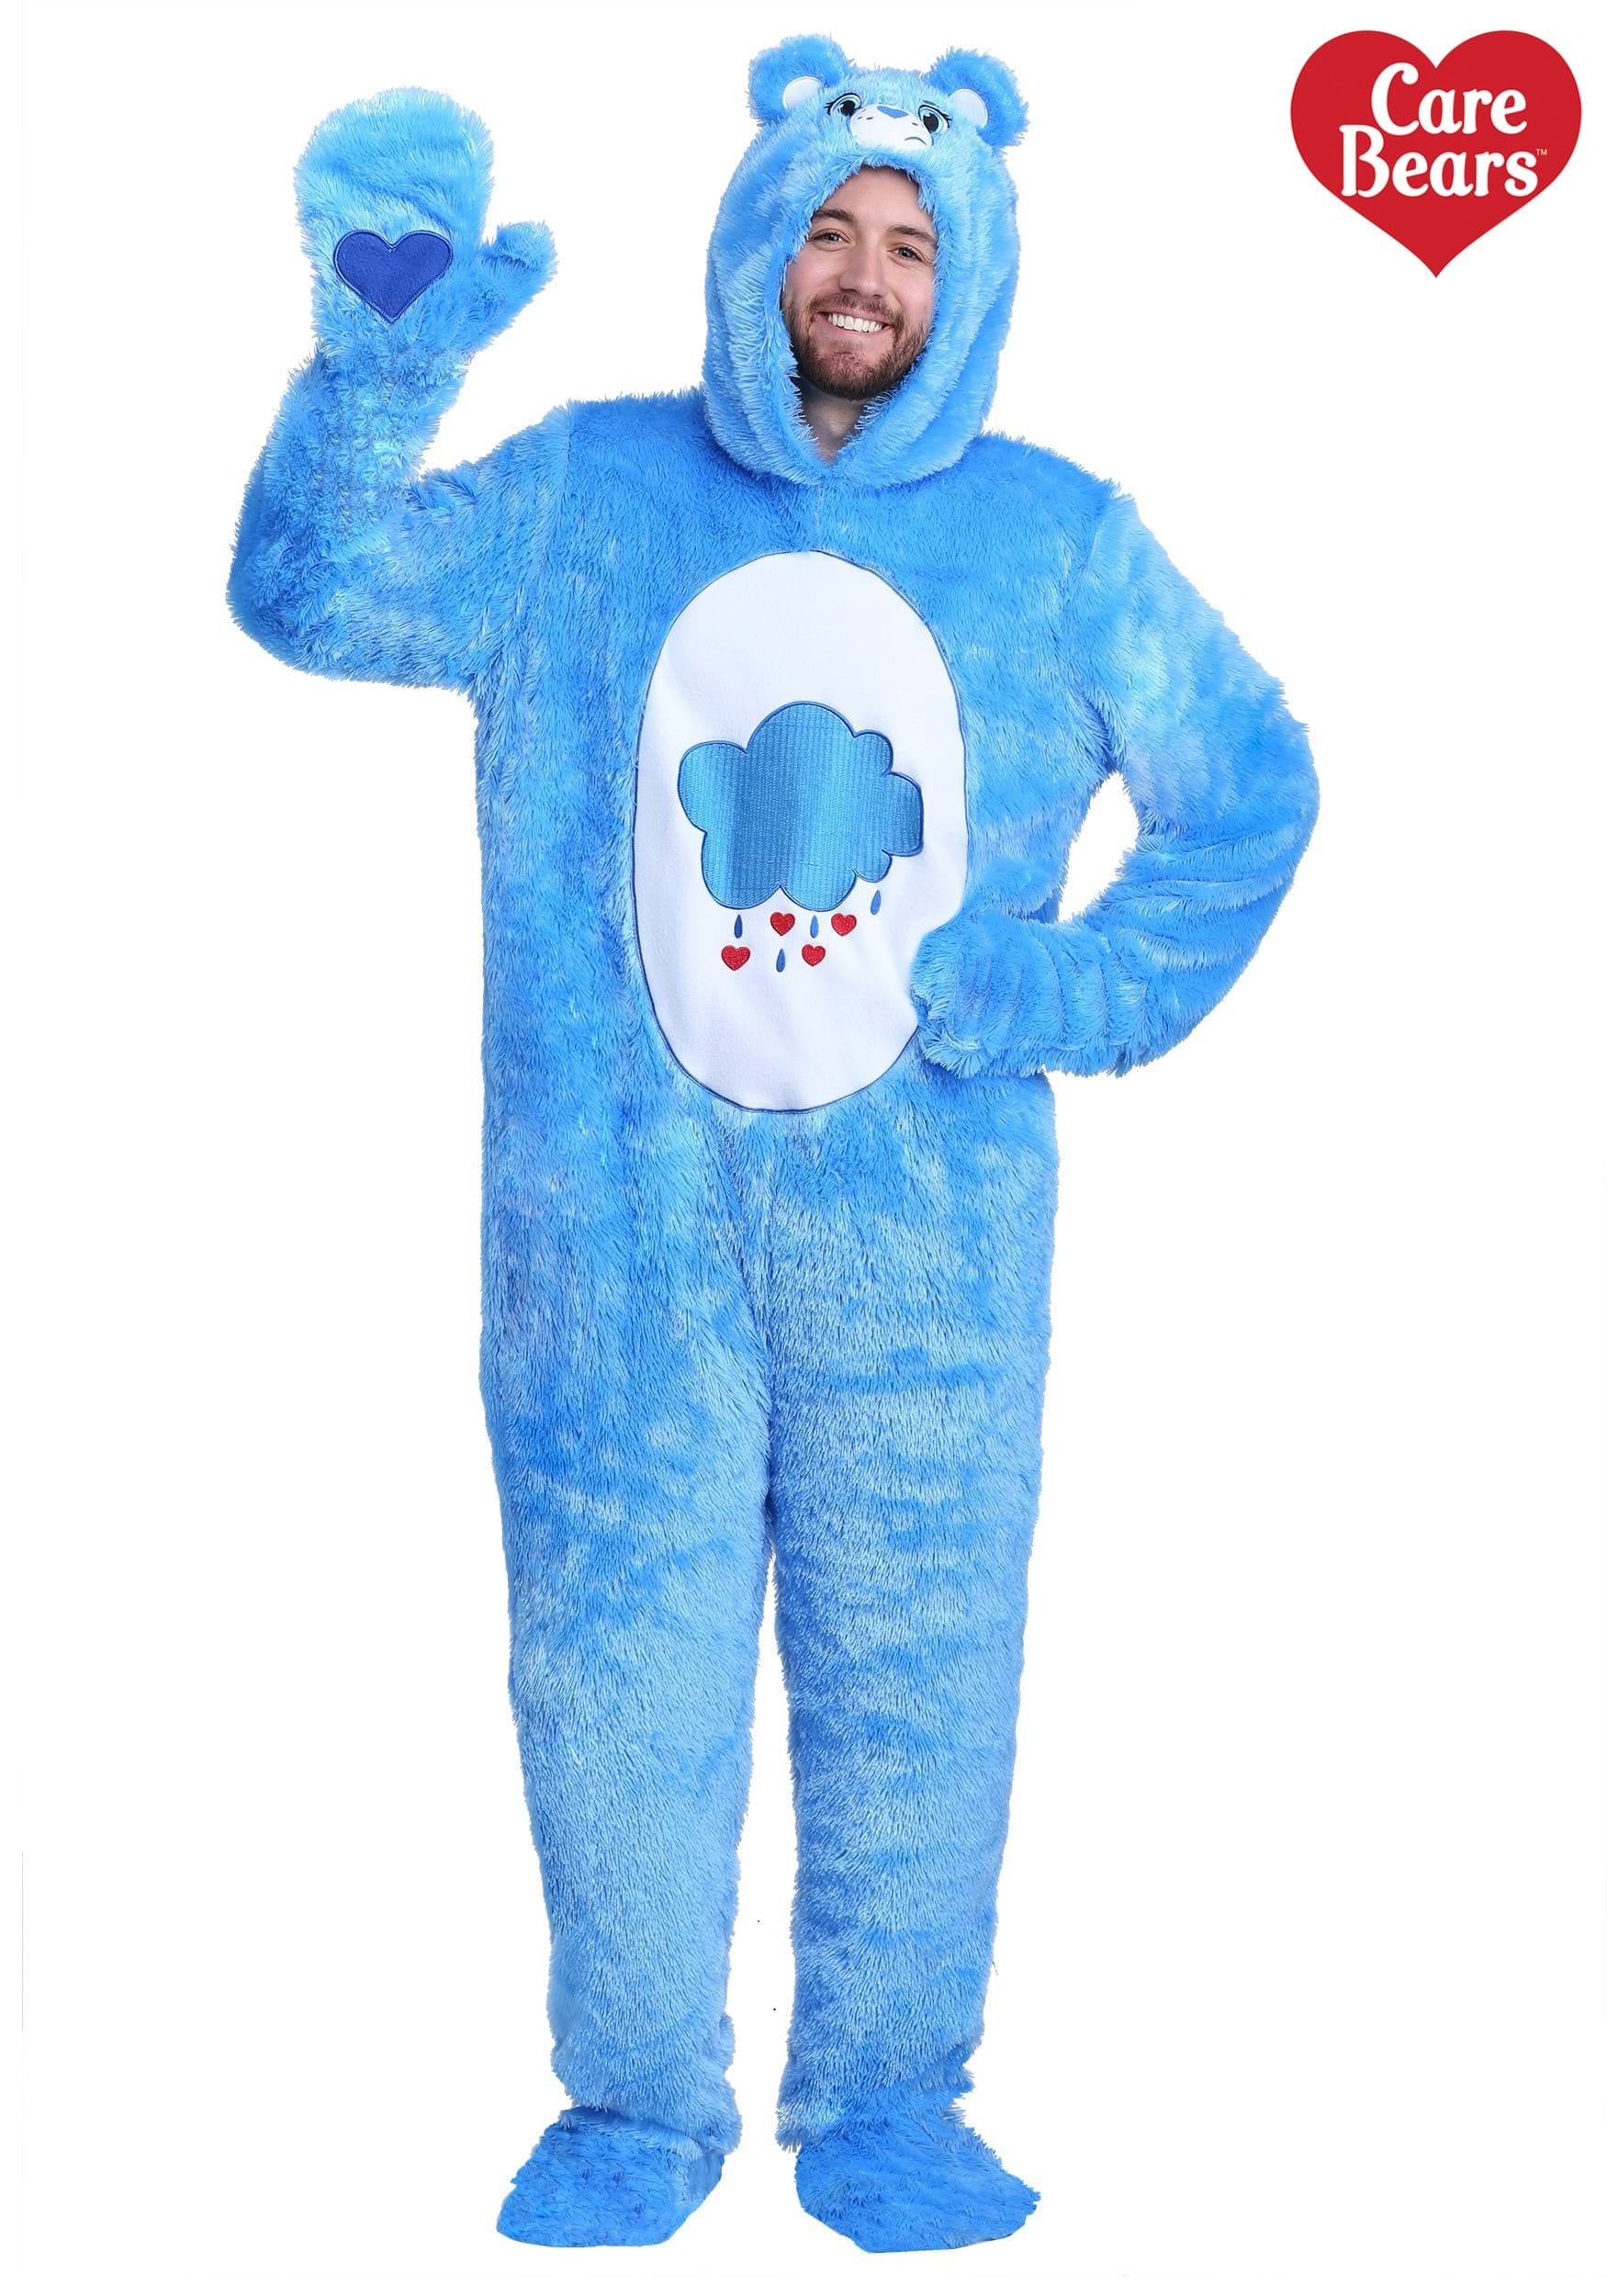 https://images.halloweencostumes.ca/products/44111/1-1/adult-plus-size-care-bears-classic-grumpy-bear-costume.jpg